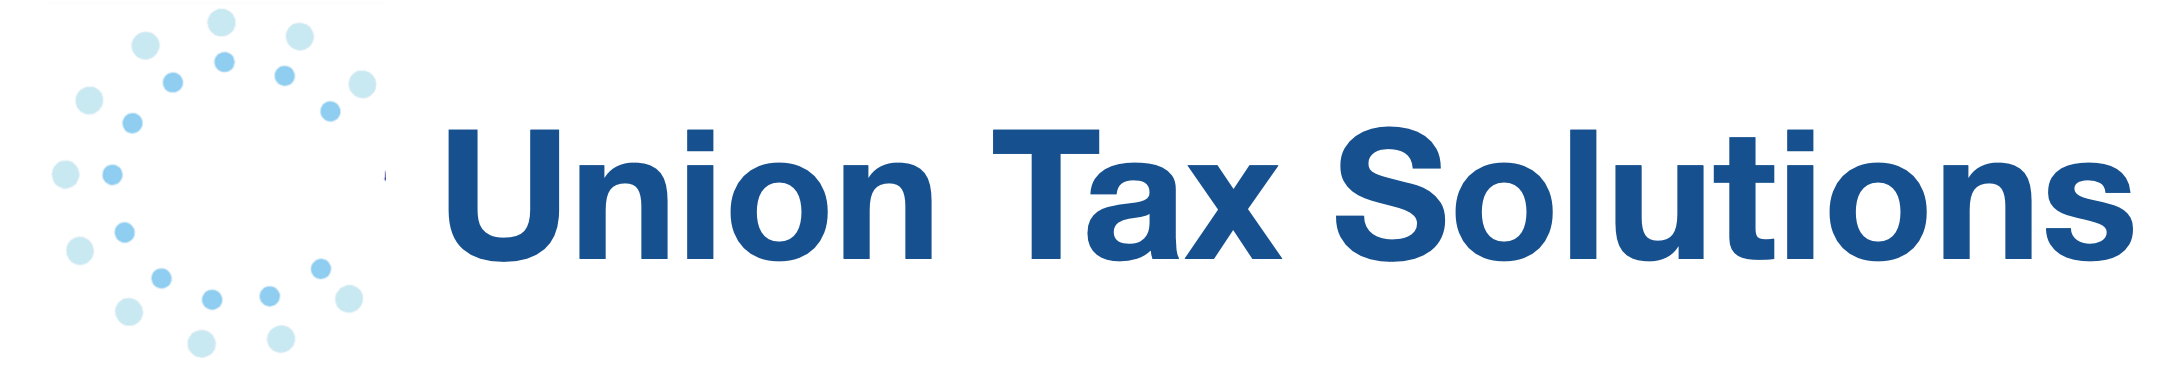 Union Tax Solutions